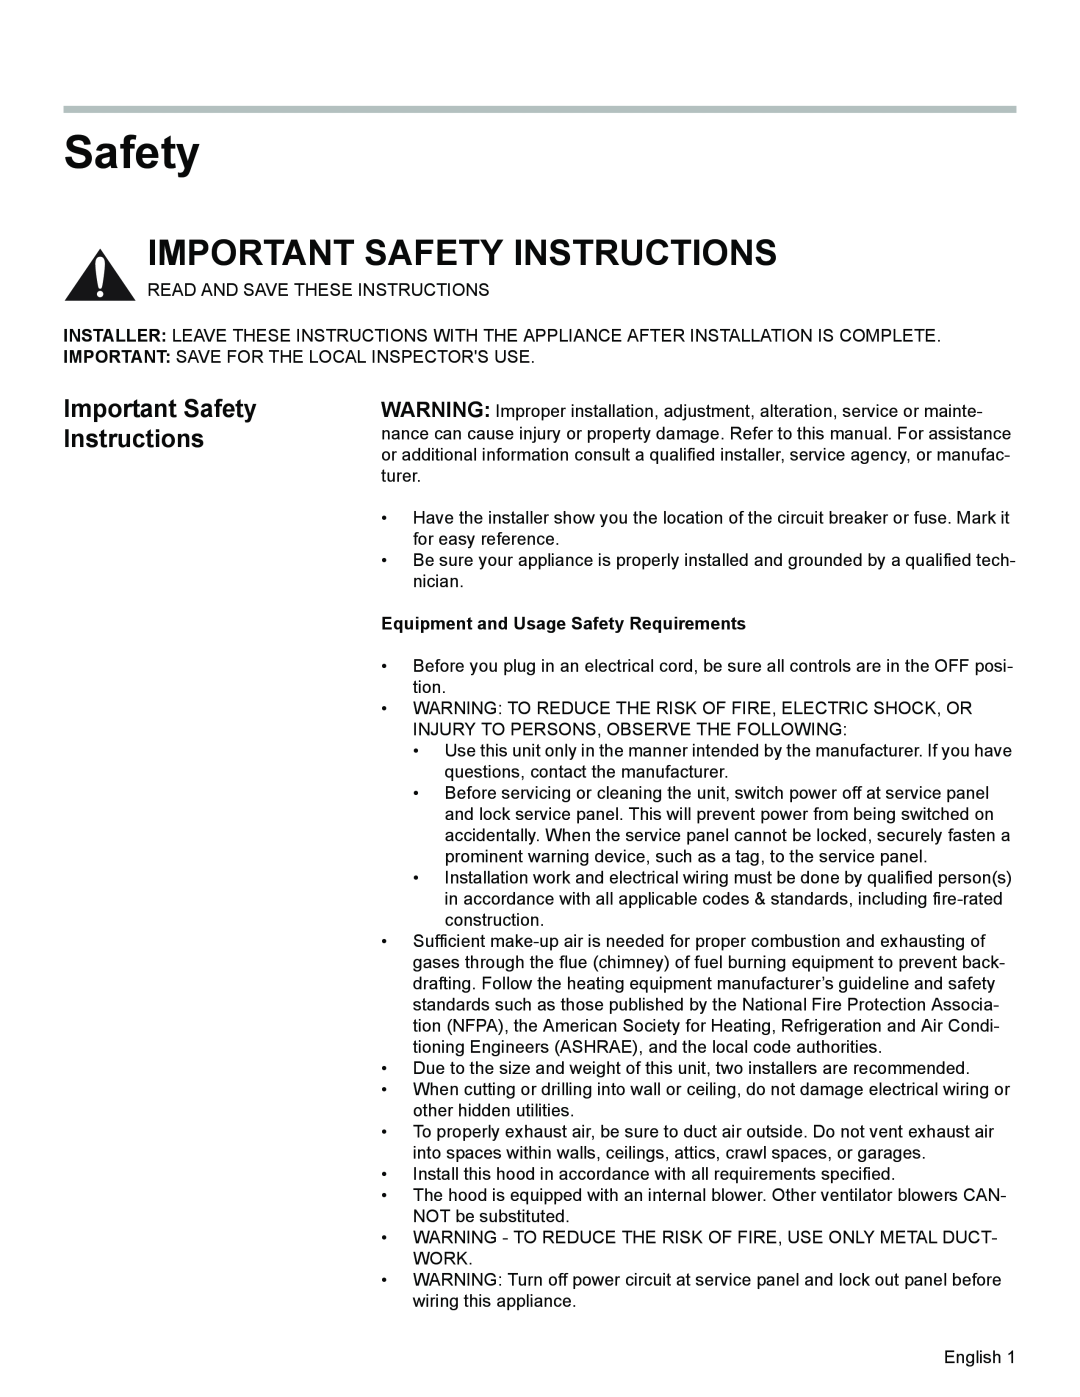 Bosch Appliances DKE96 installation manual Important Safety Instructions, Equipment and Usage Safety Requirements 